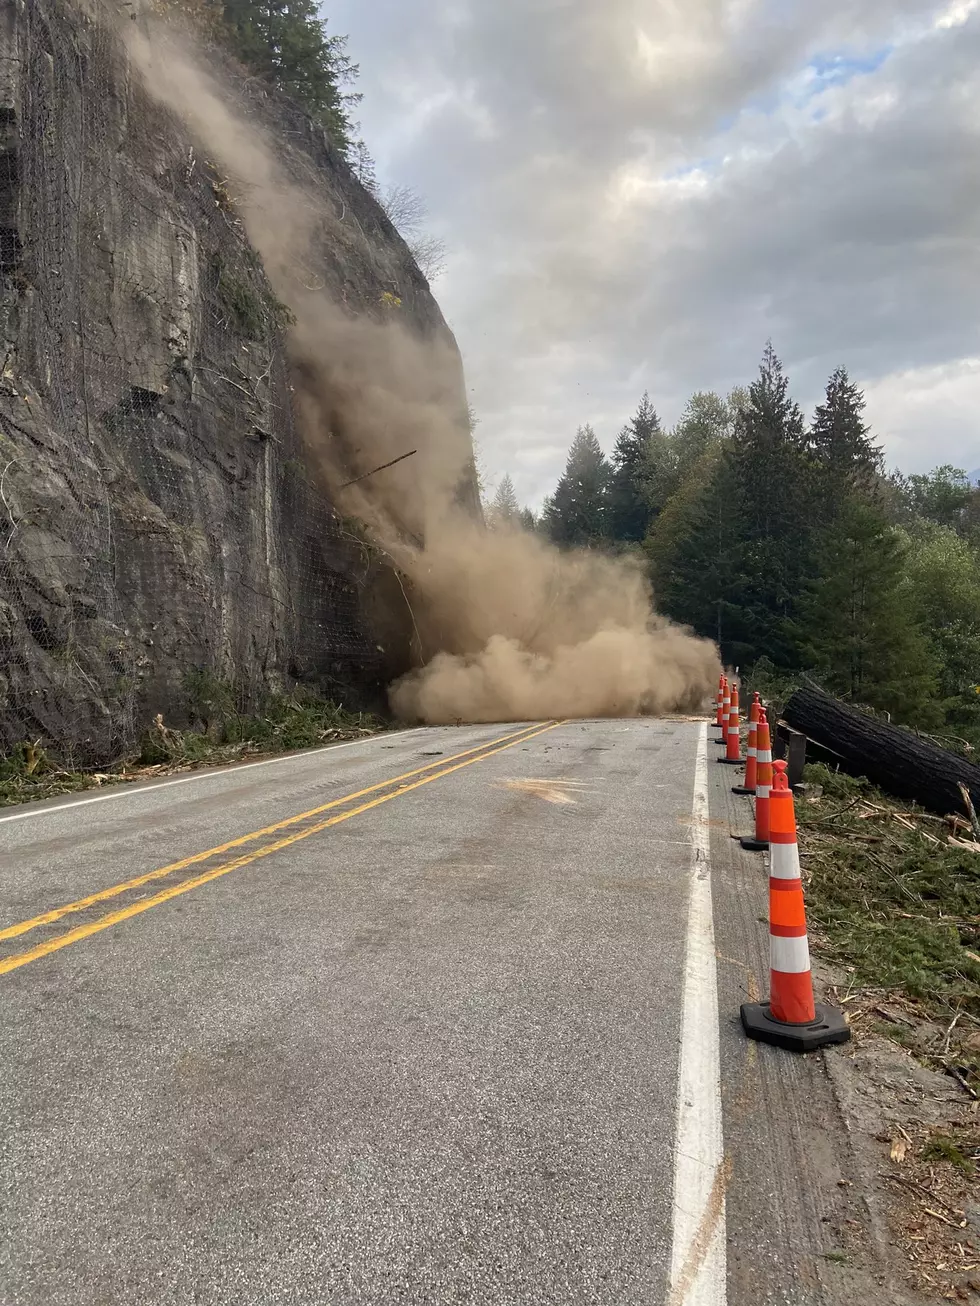 PHOTOS: U.S. 2 Back Open After Tree Stump Removal